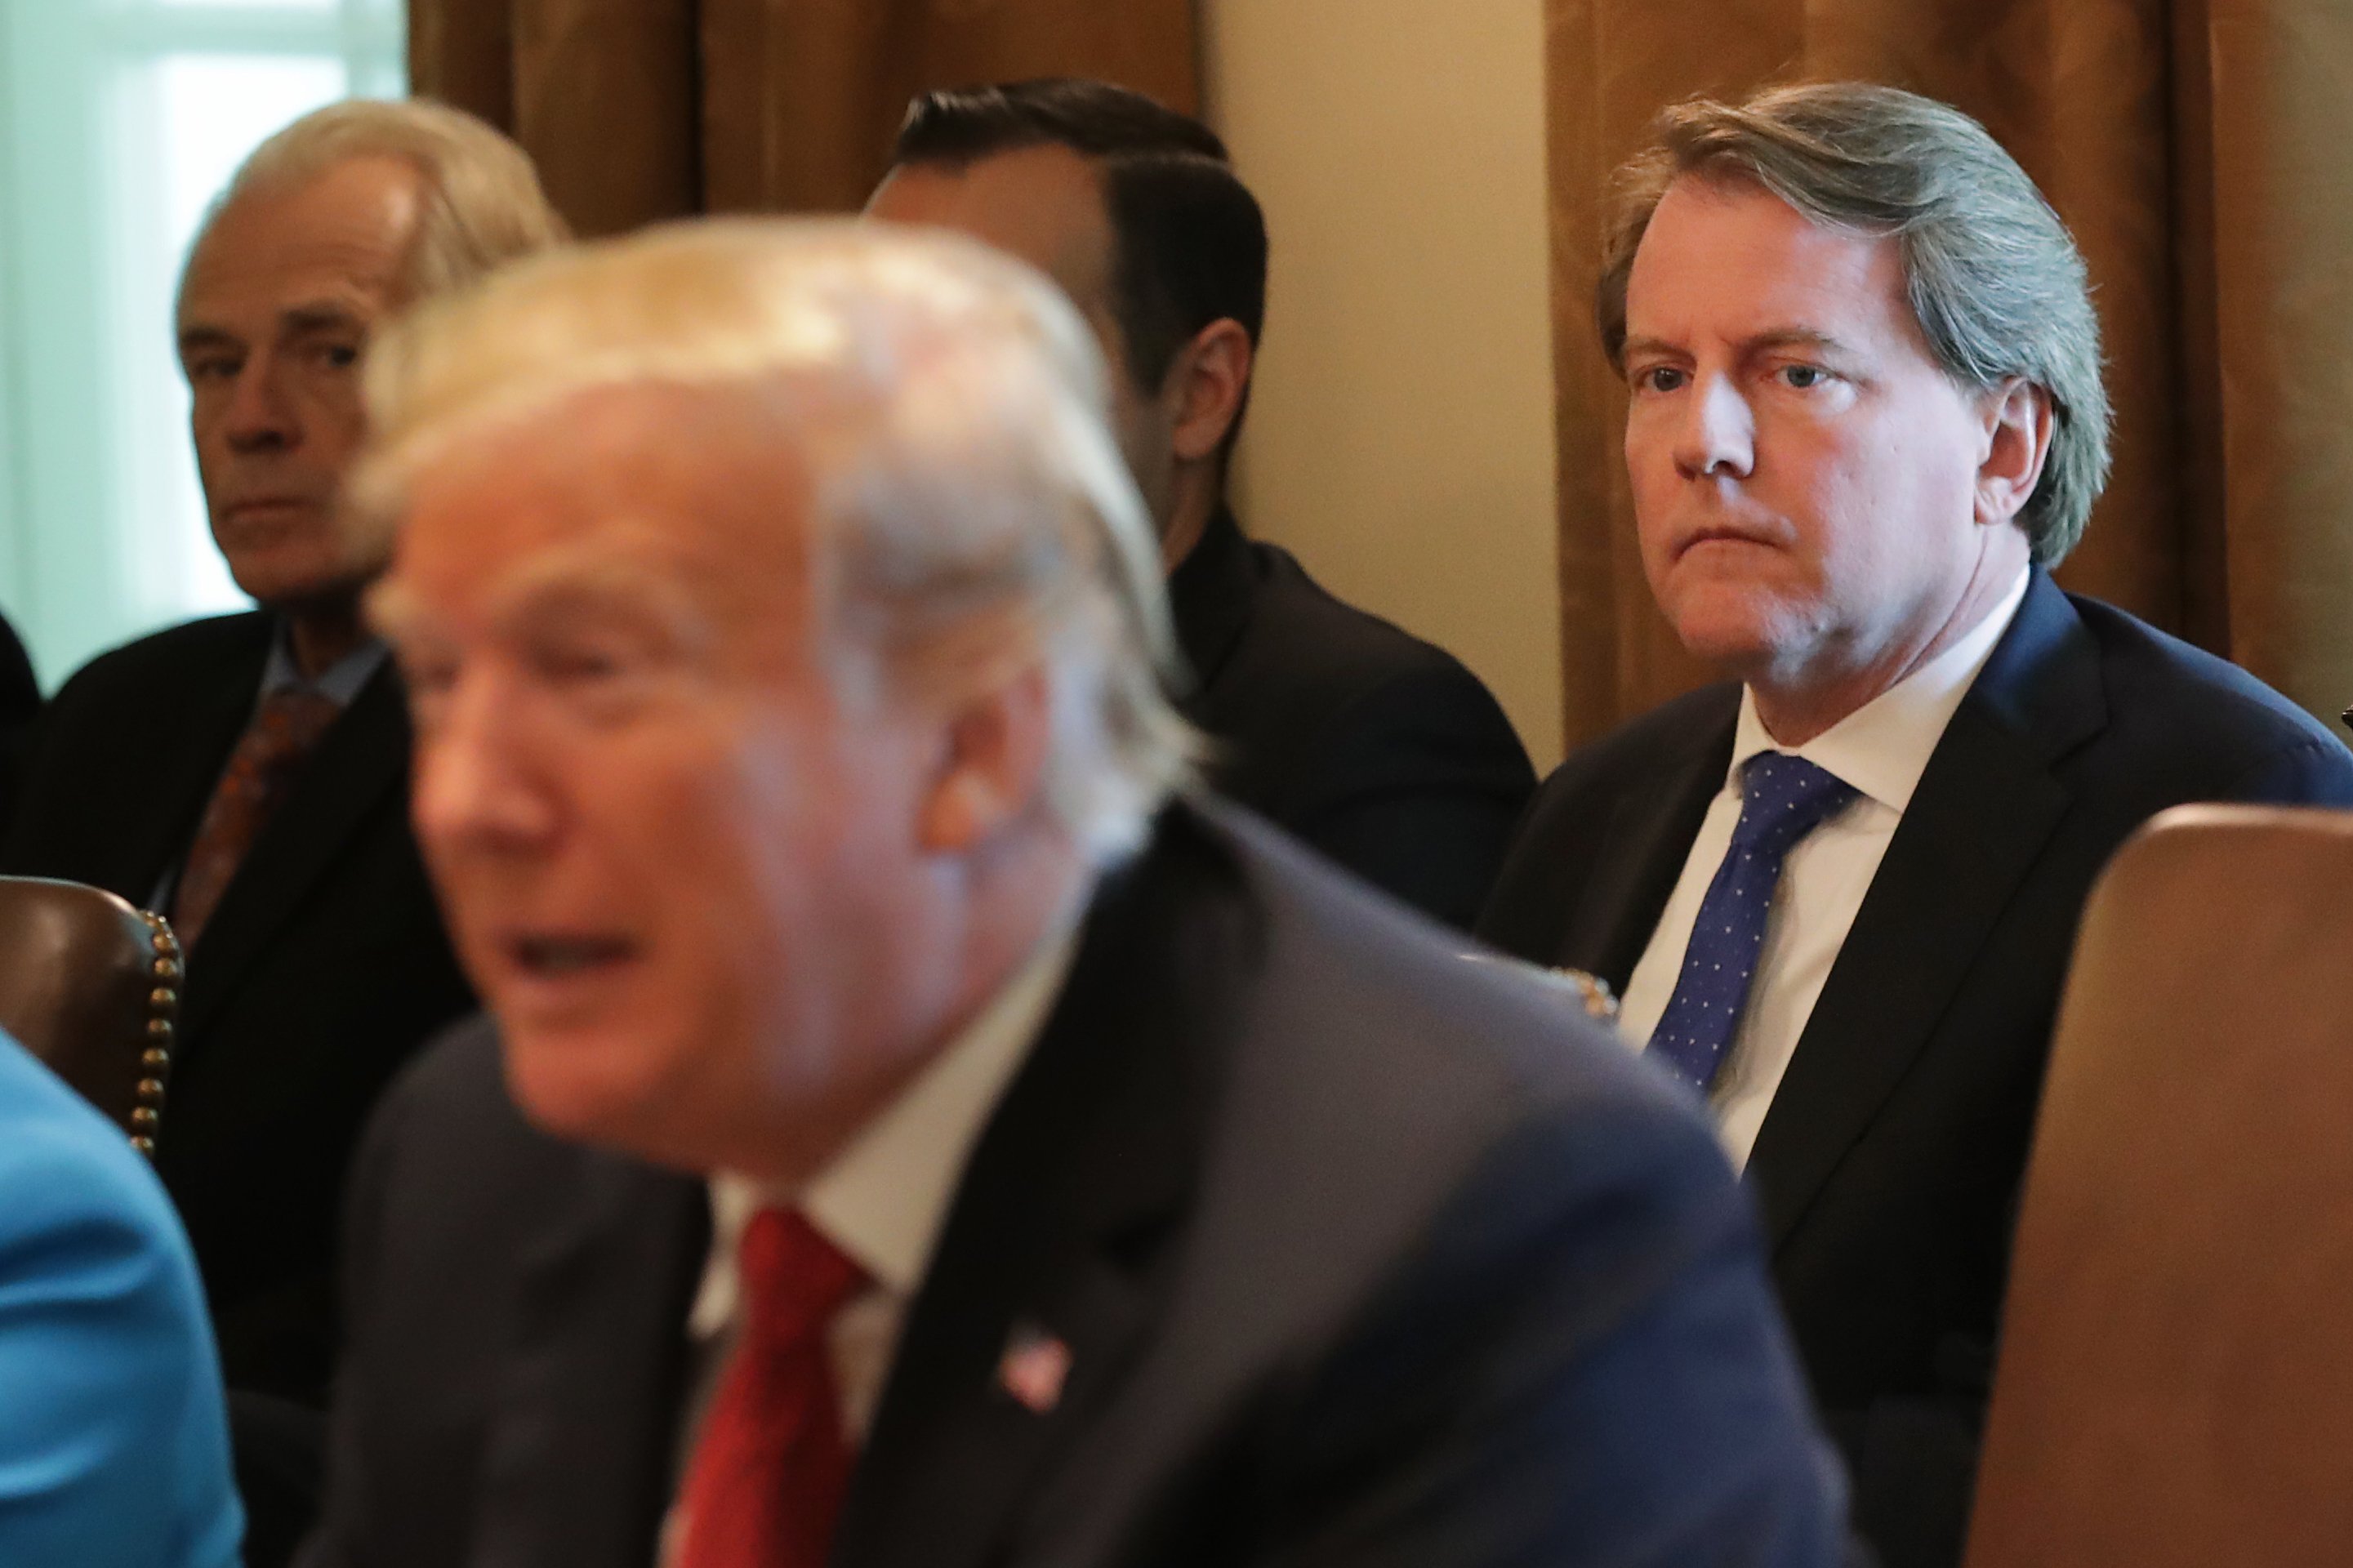 White House Counsel Don McGahn (R) attends a cabinet meeting with President Donald Trump in the at the White House on October 17, 2018. (Chip Somodevilla/Getty Images)